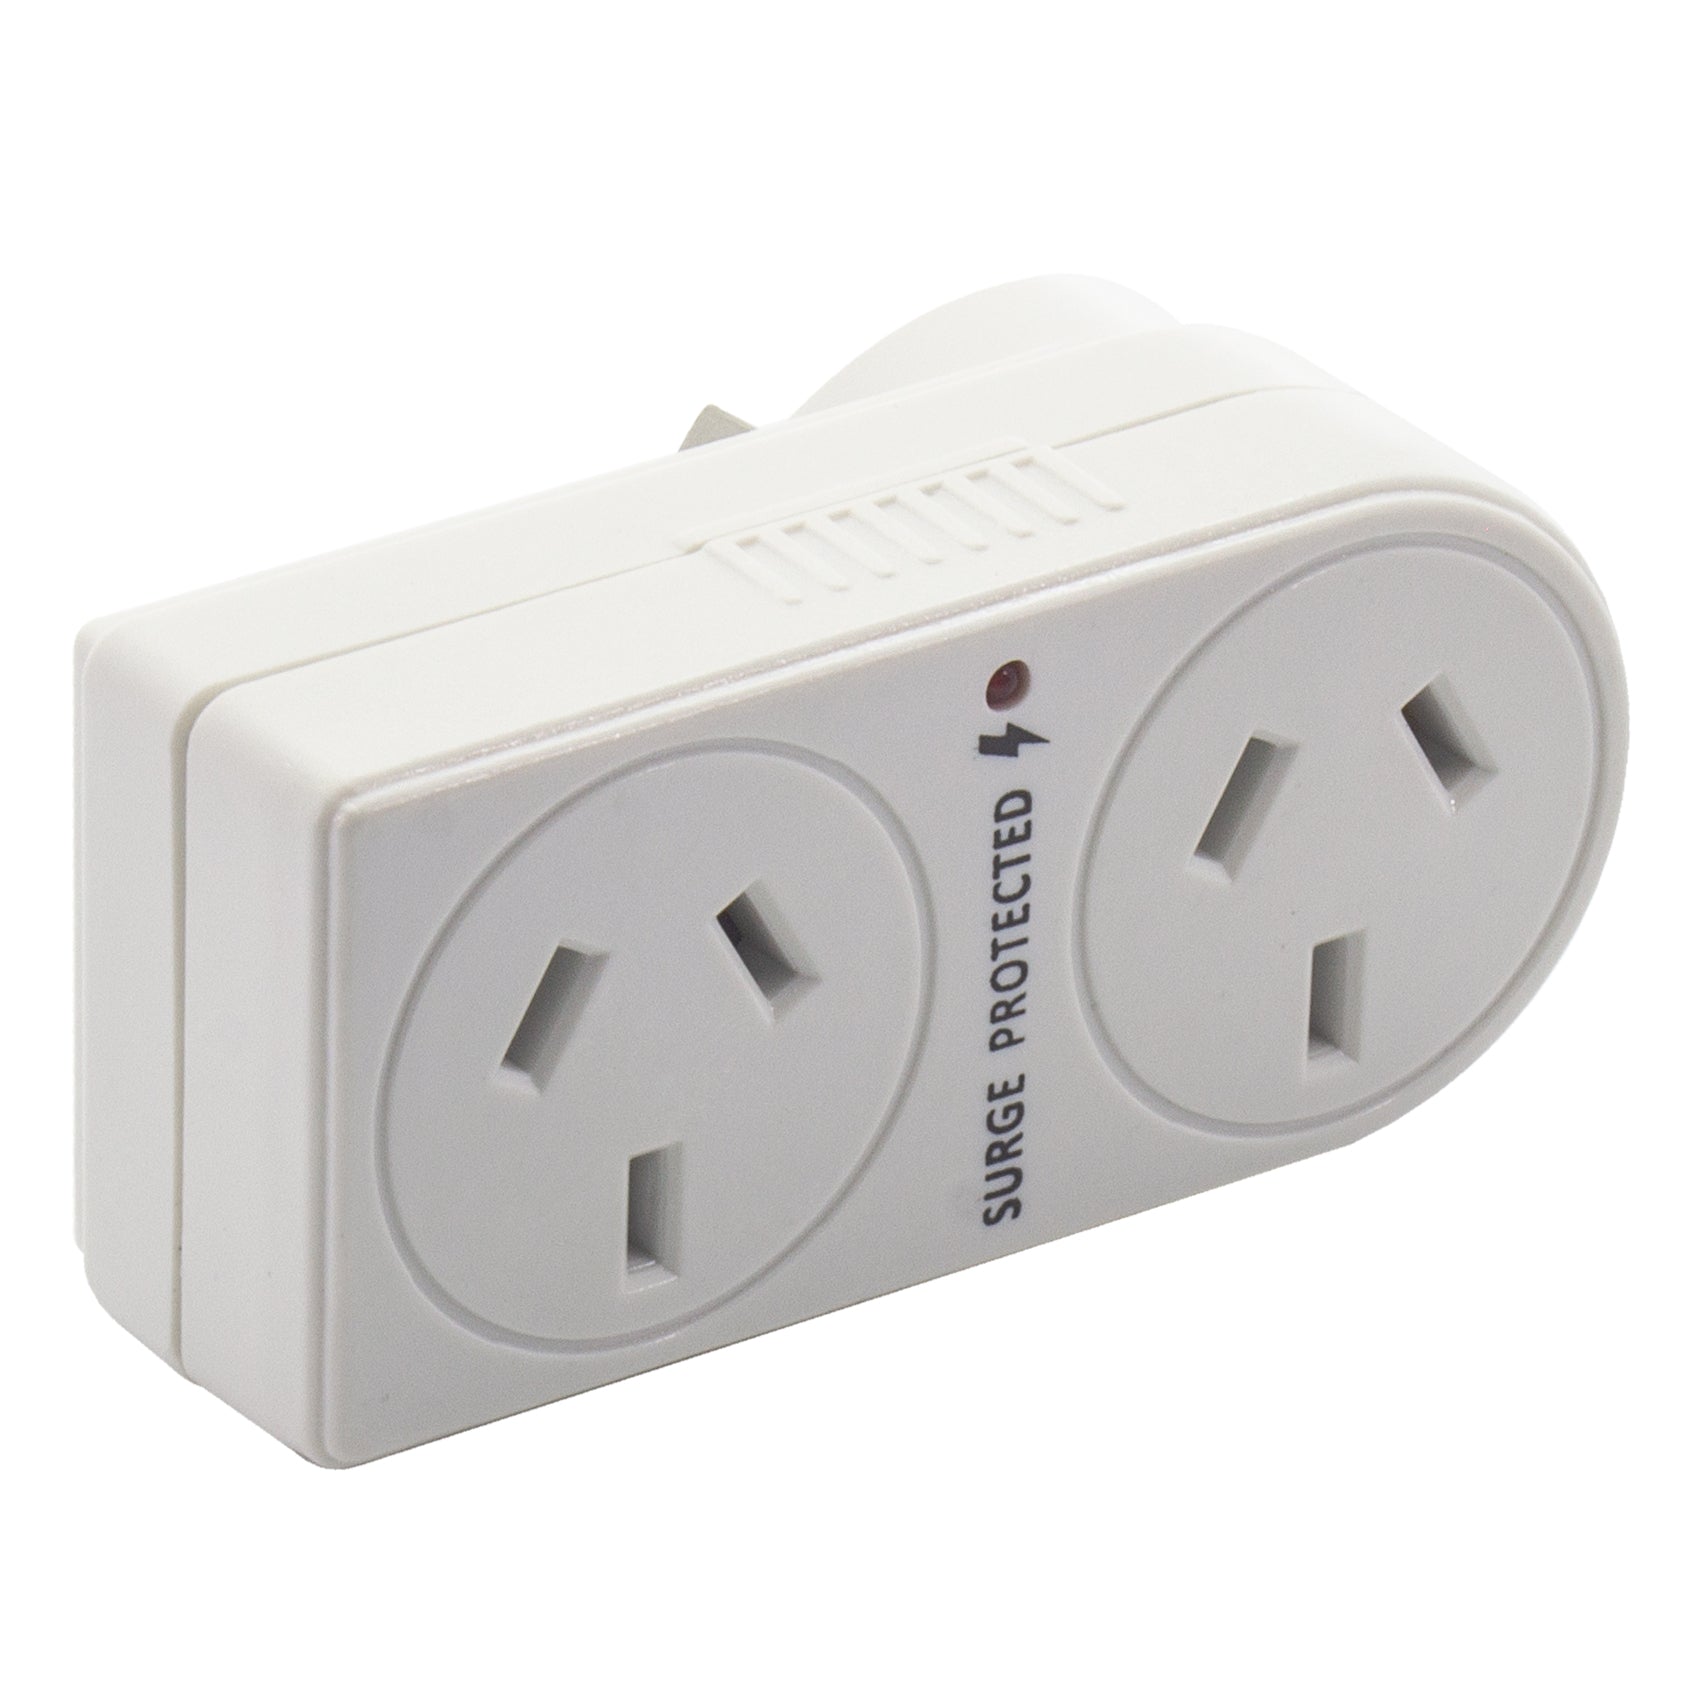 Double Adaptor - Surge Protection